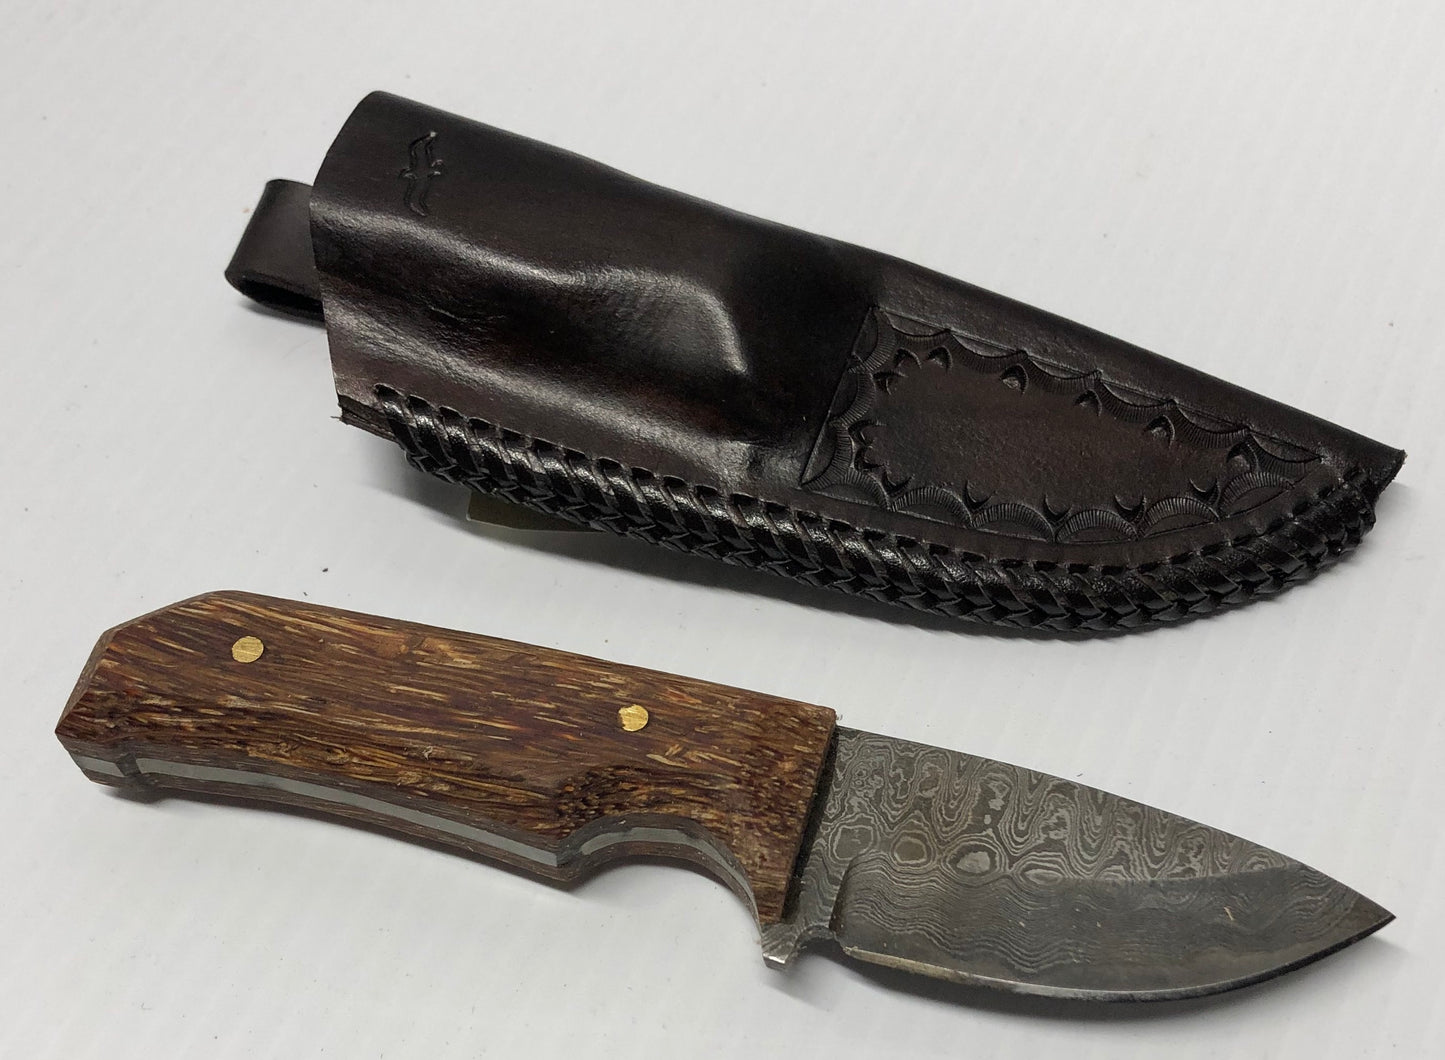 Georgecraft Hunting Knives with Leather Sheath